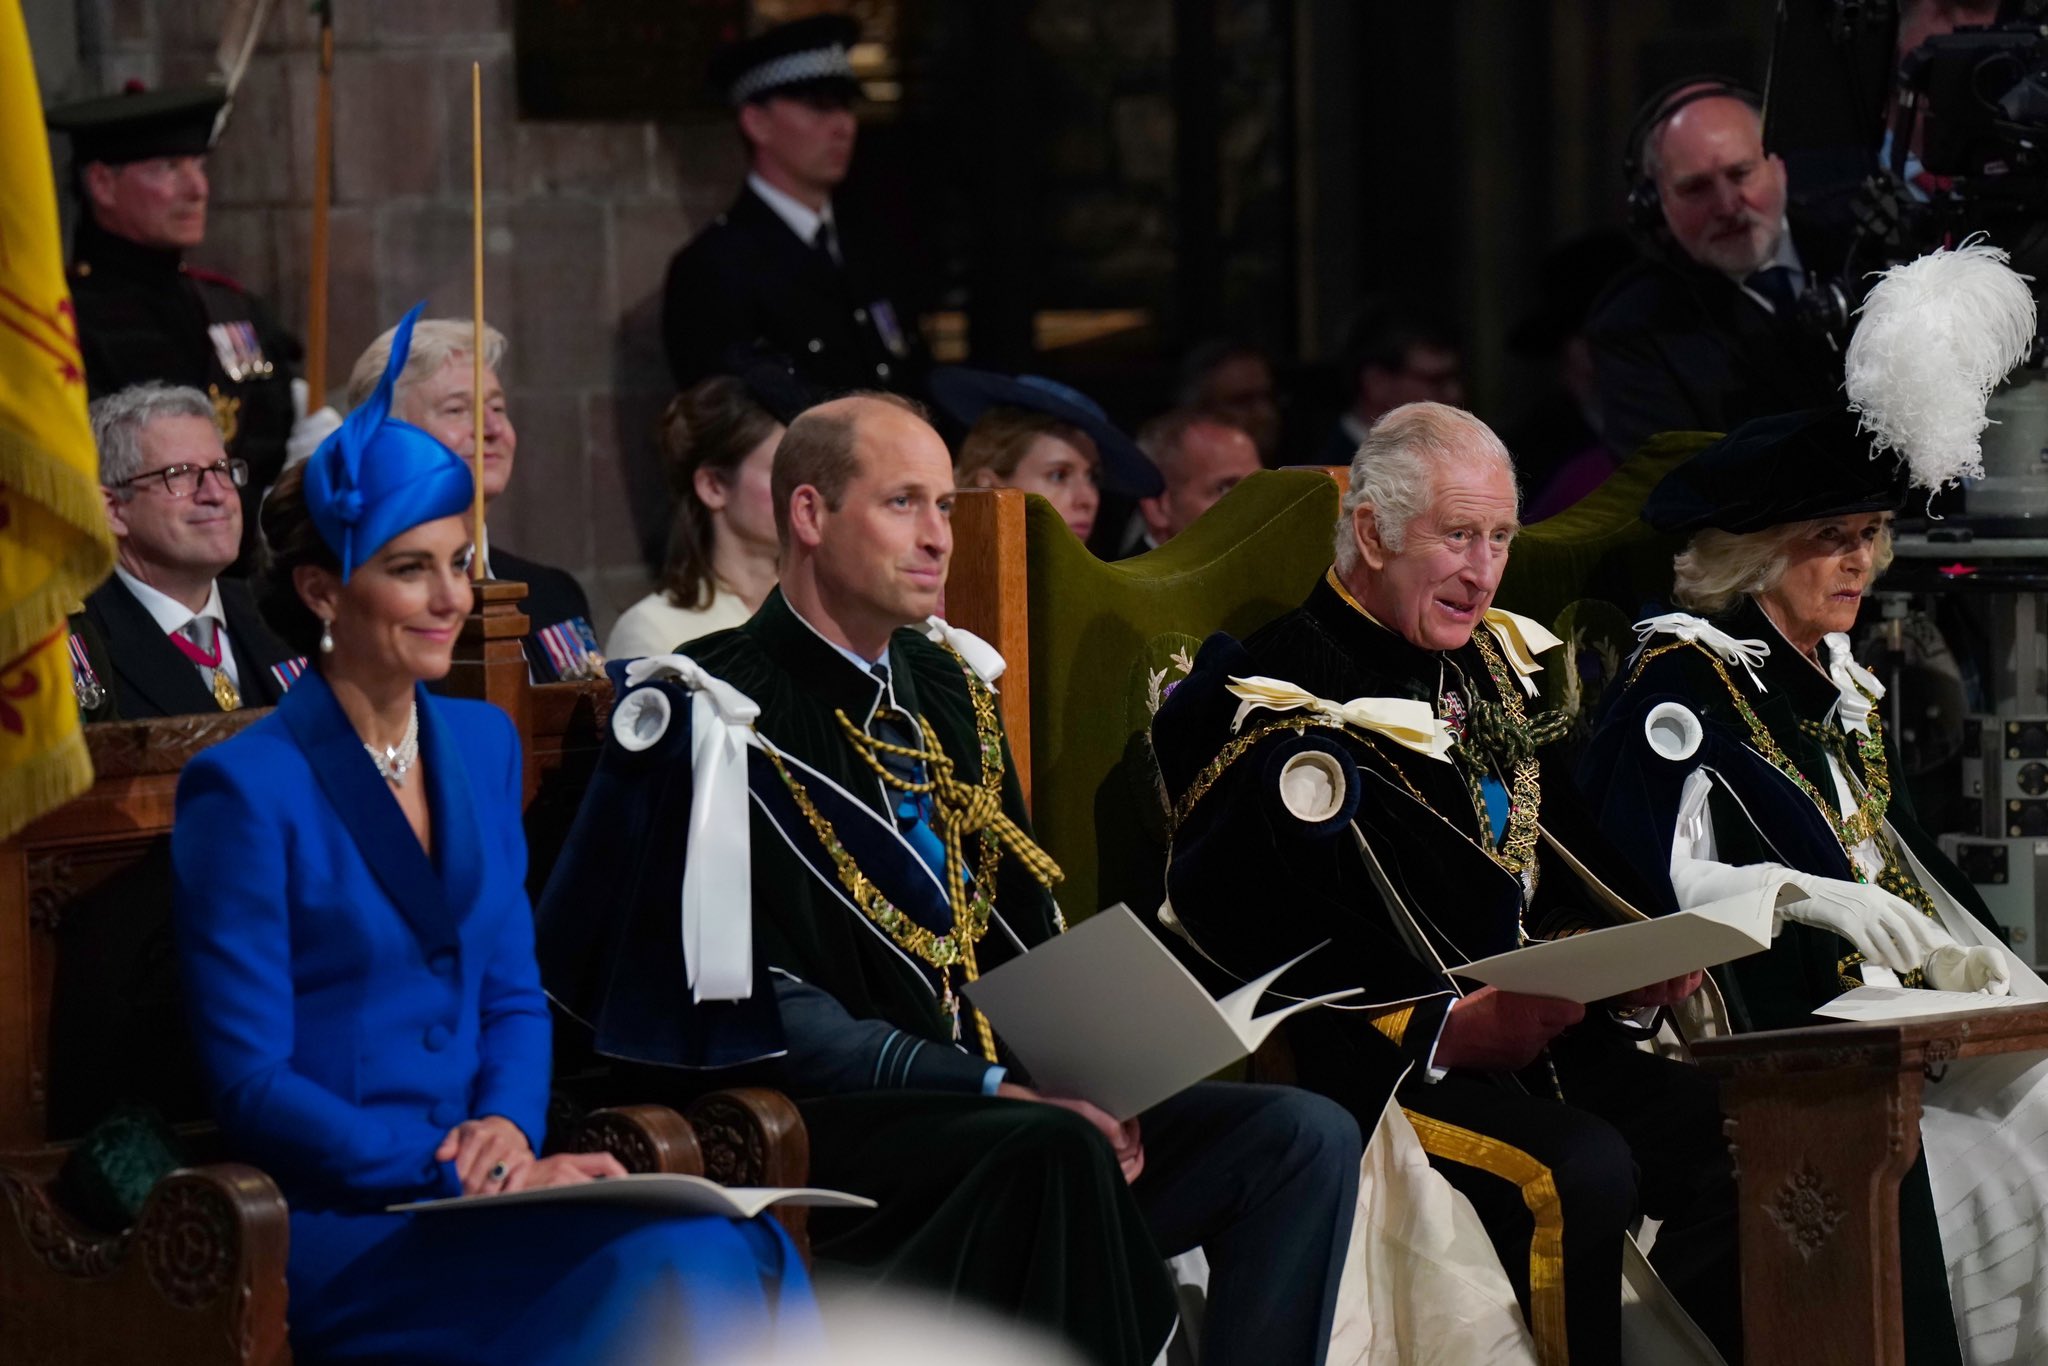 royal visit to dunfermline